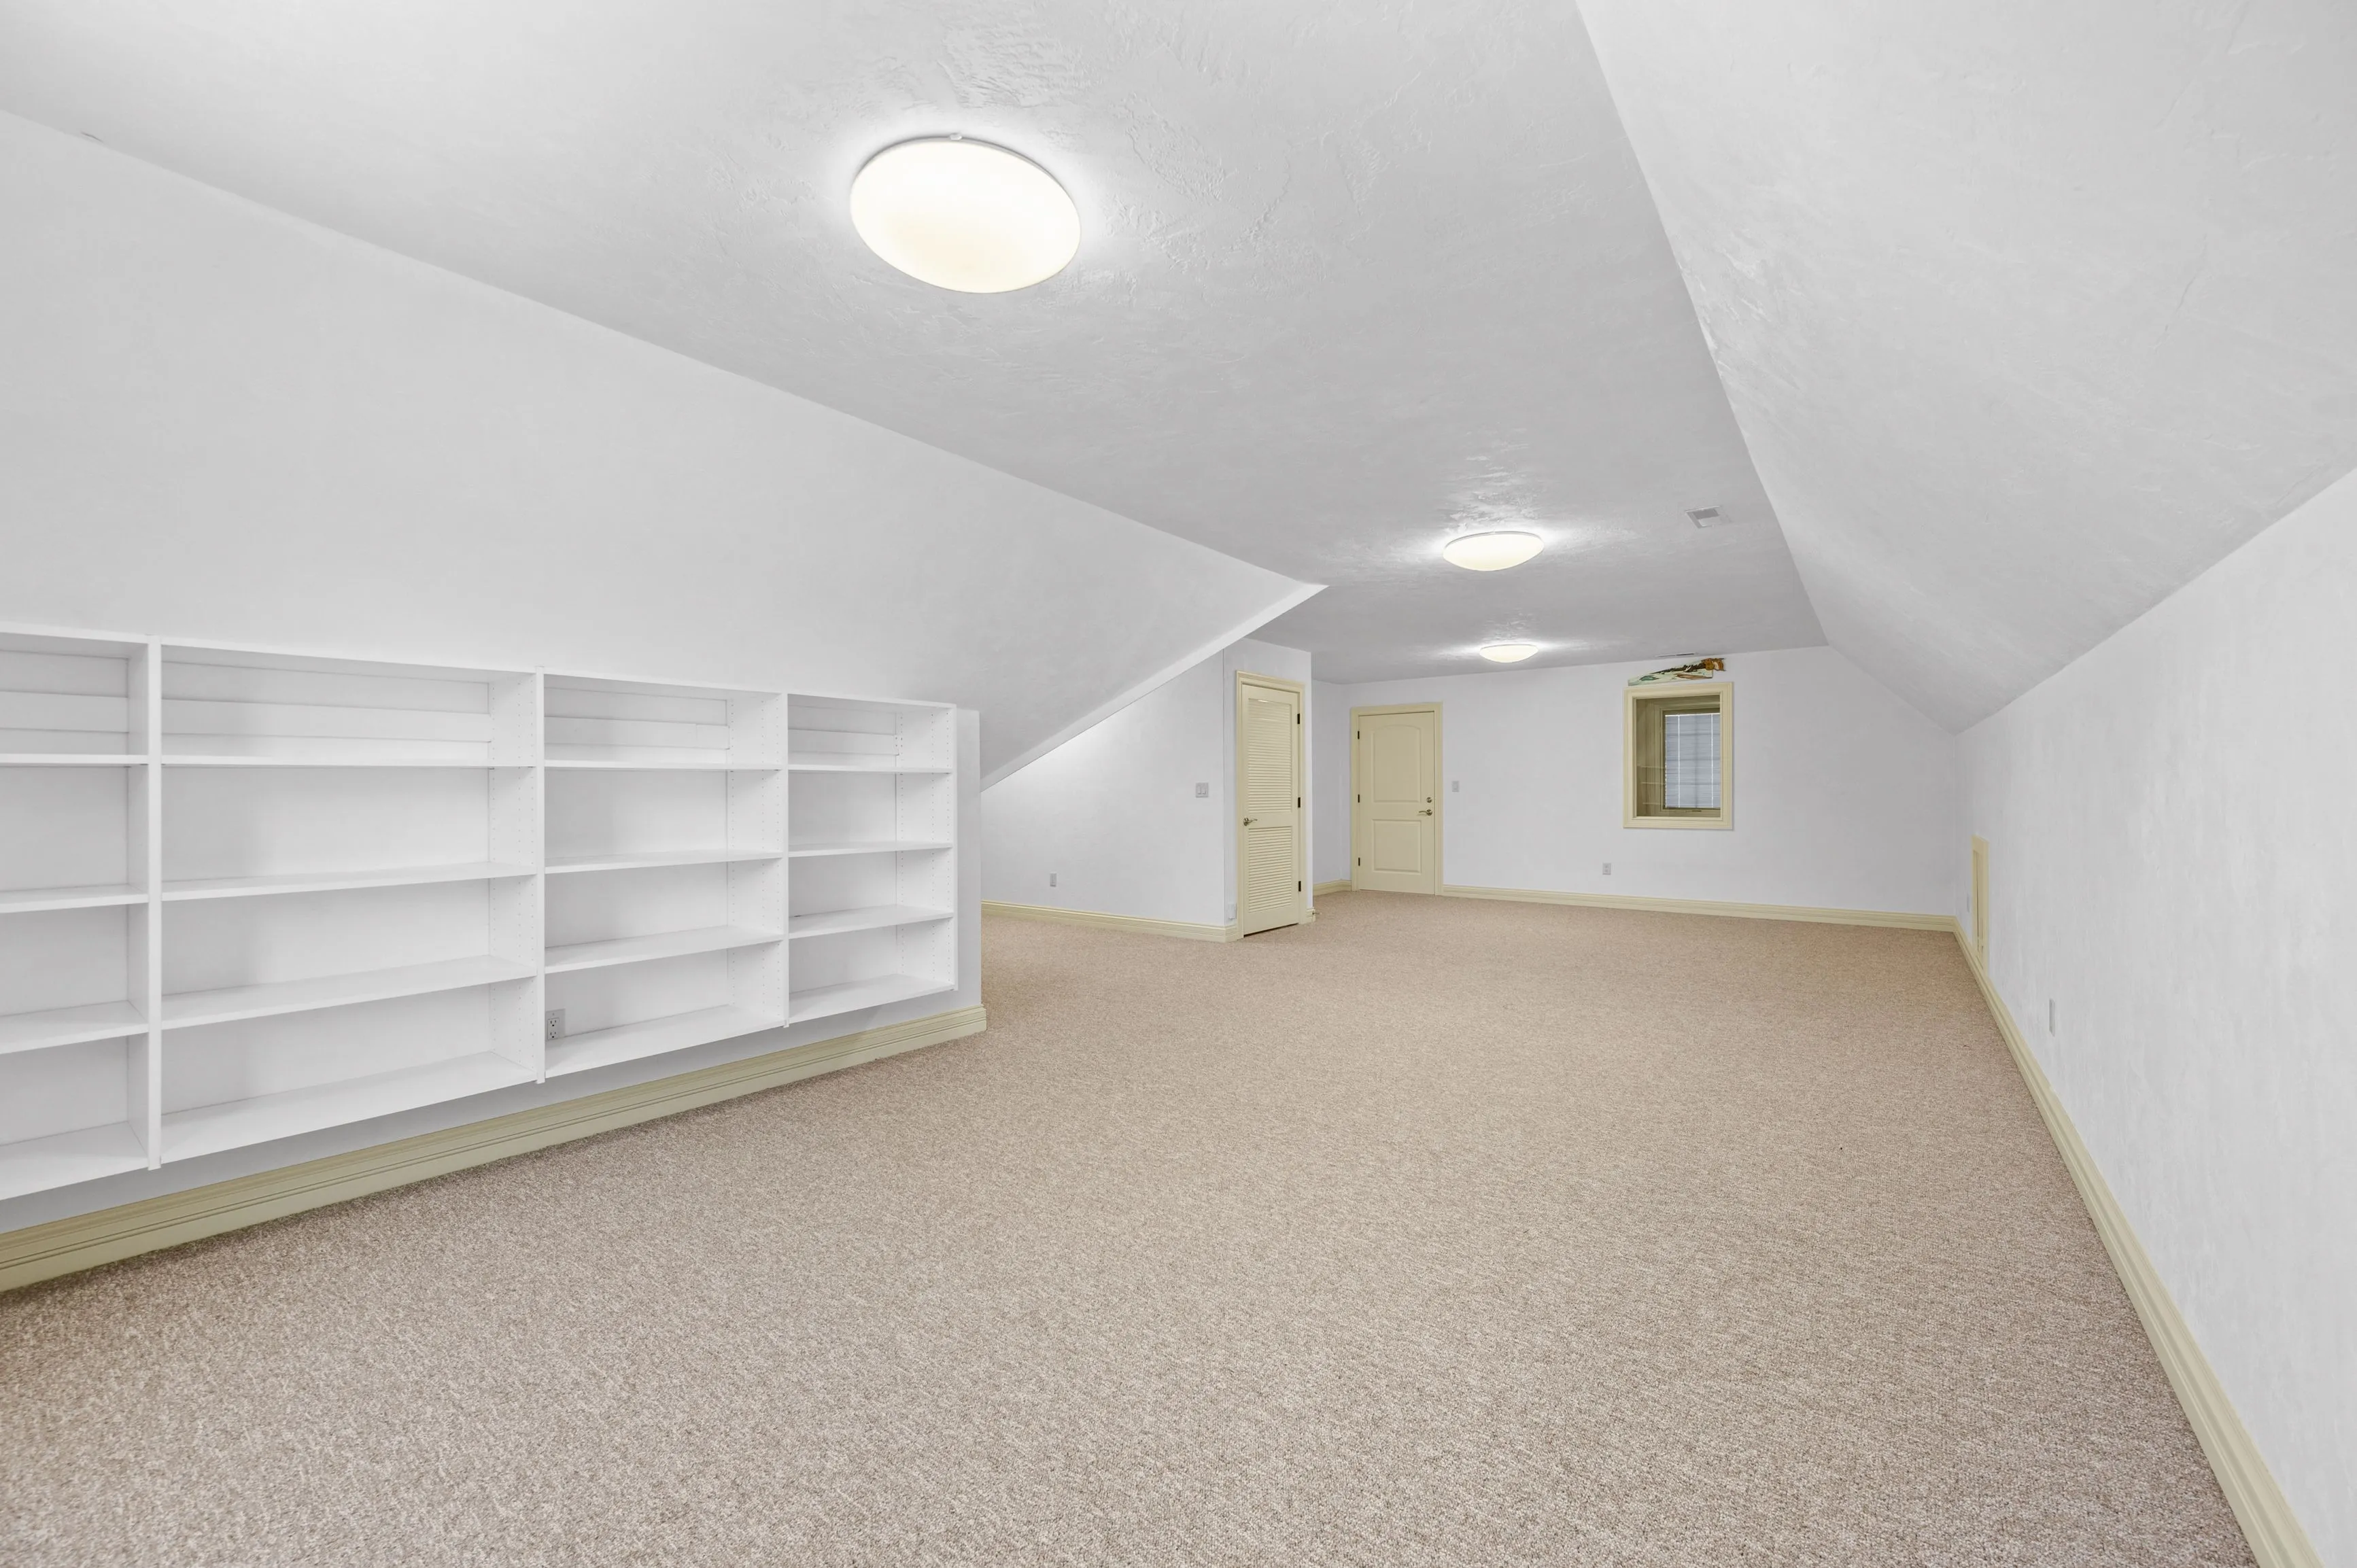 Bright, empty attic room with beige carpet, white walls, slanted ceilings, two ceiling lights, and a built-in white bookshelf.